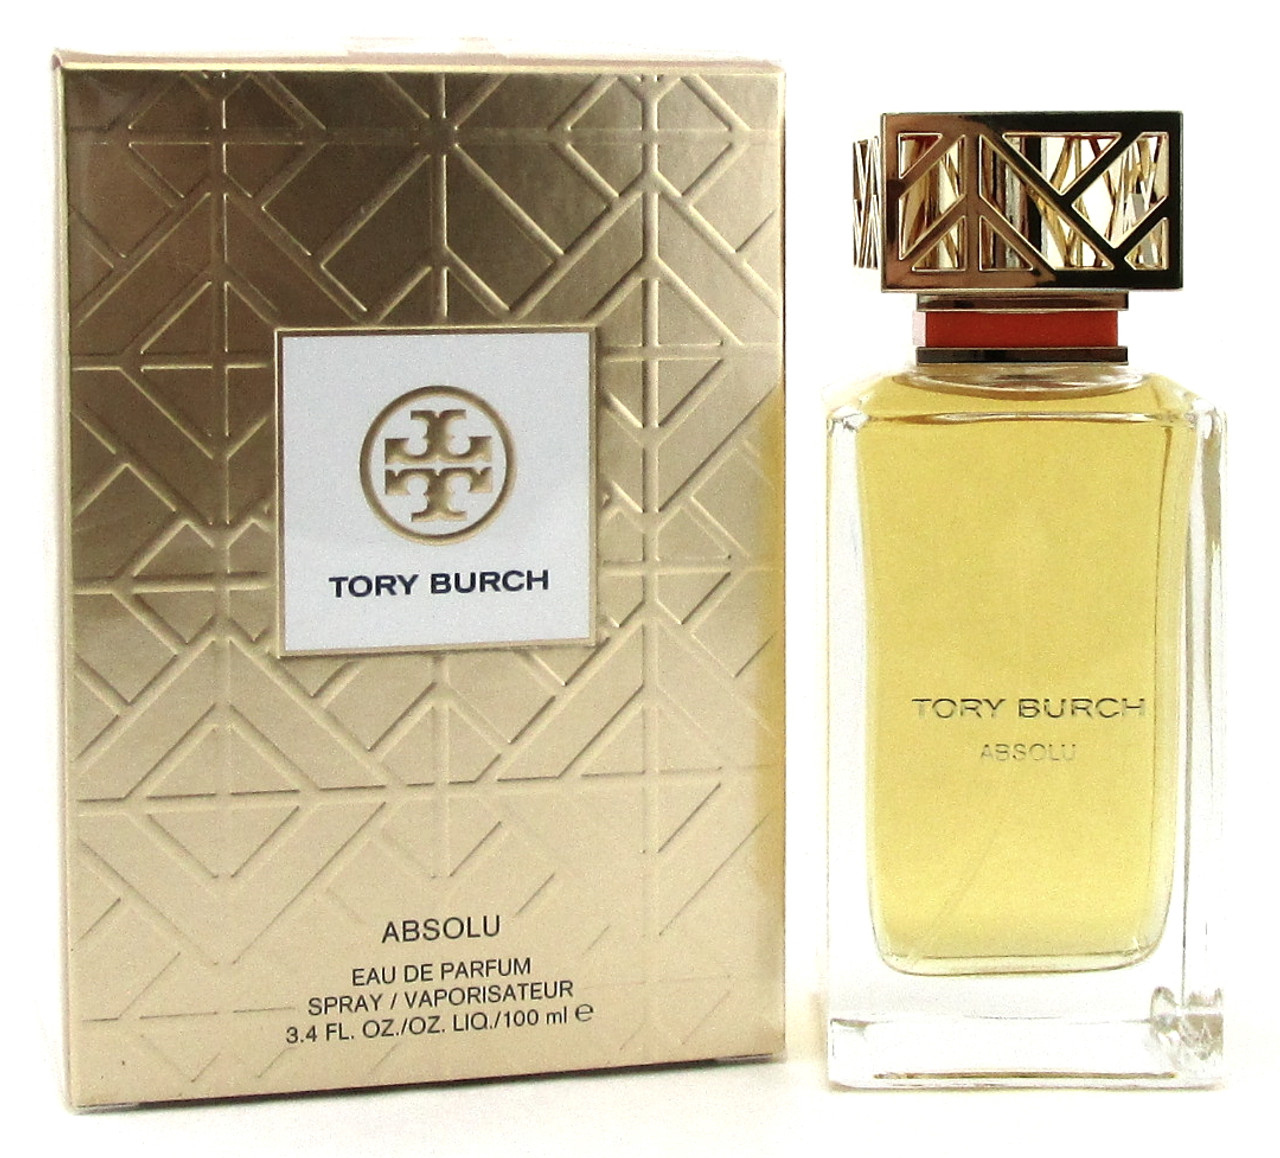 Tory Burch Absolu Perfume by Tory Burch  oz. EDP Spray. New in Sealed  Box  -FREE SHIPPING* From An Independent Seller of  100% Authentic Brands Since 2006 (*standard shipping to 48 states)